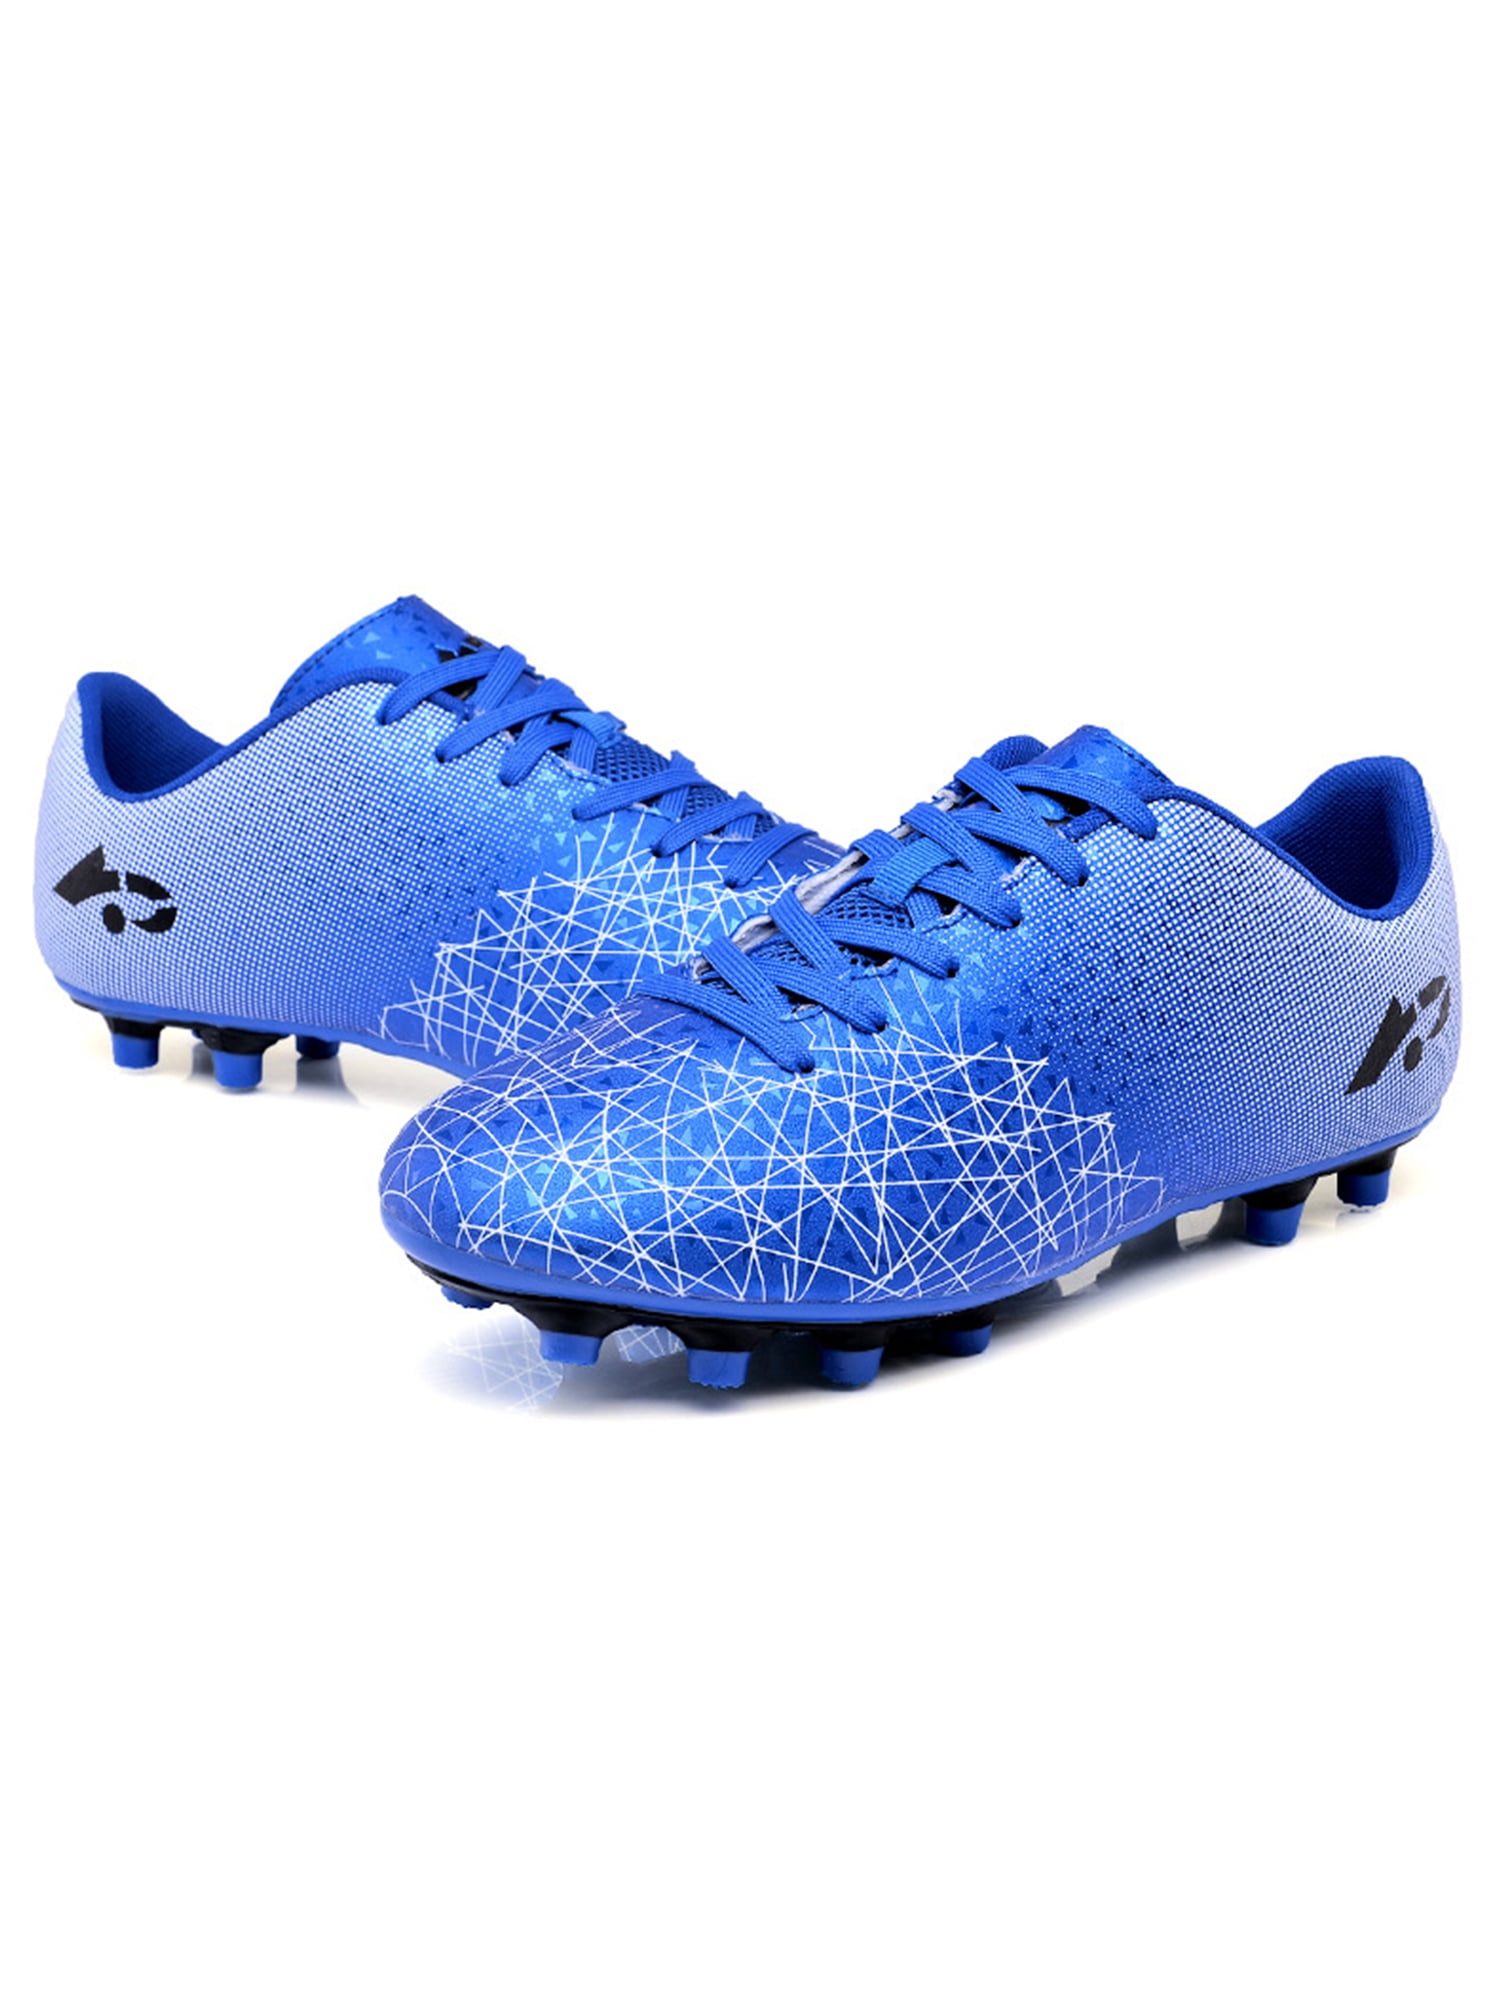 Men's Soccer Shoes Football Sneakers Soccer Cleats Fashion Outdoor Trainer Boots 